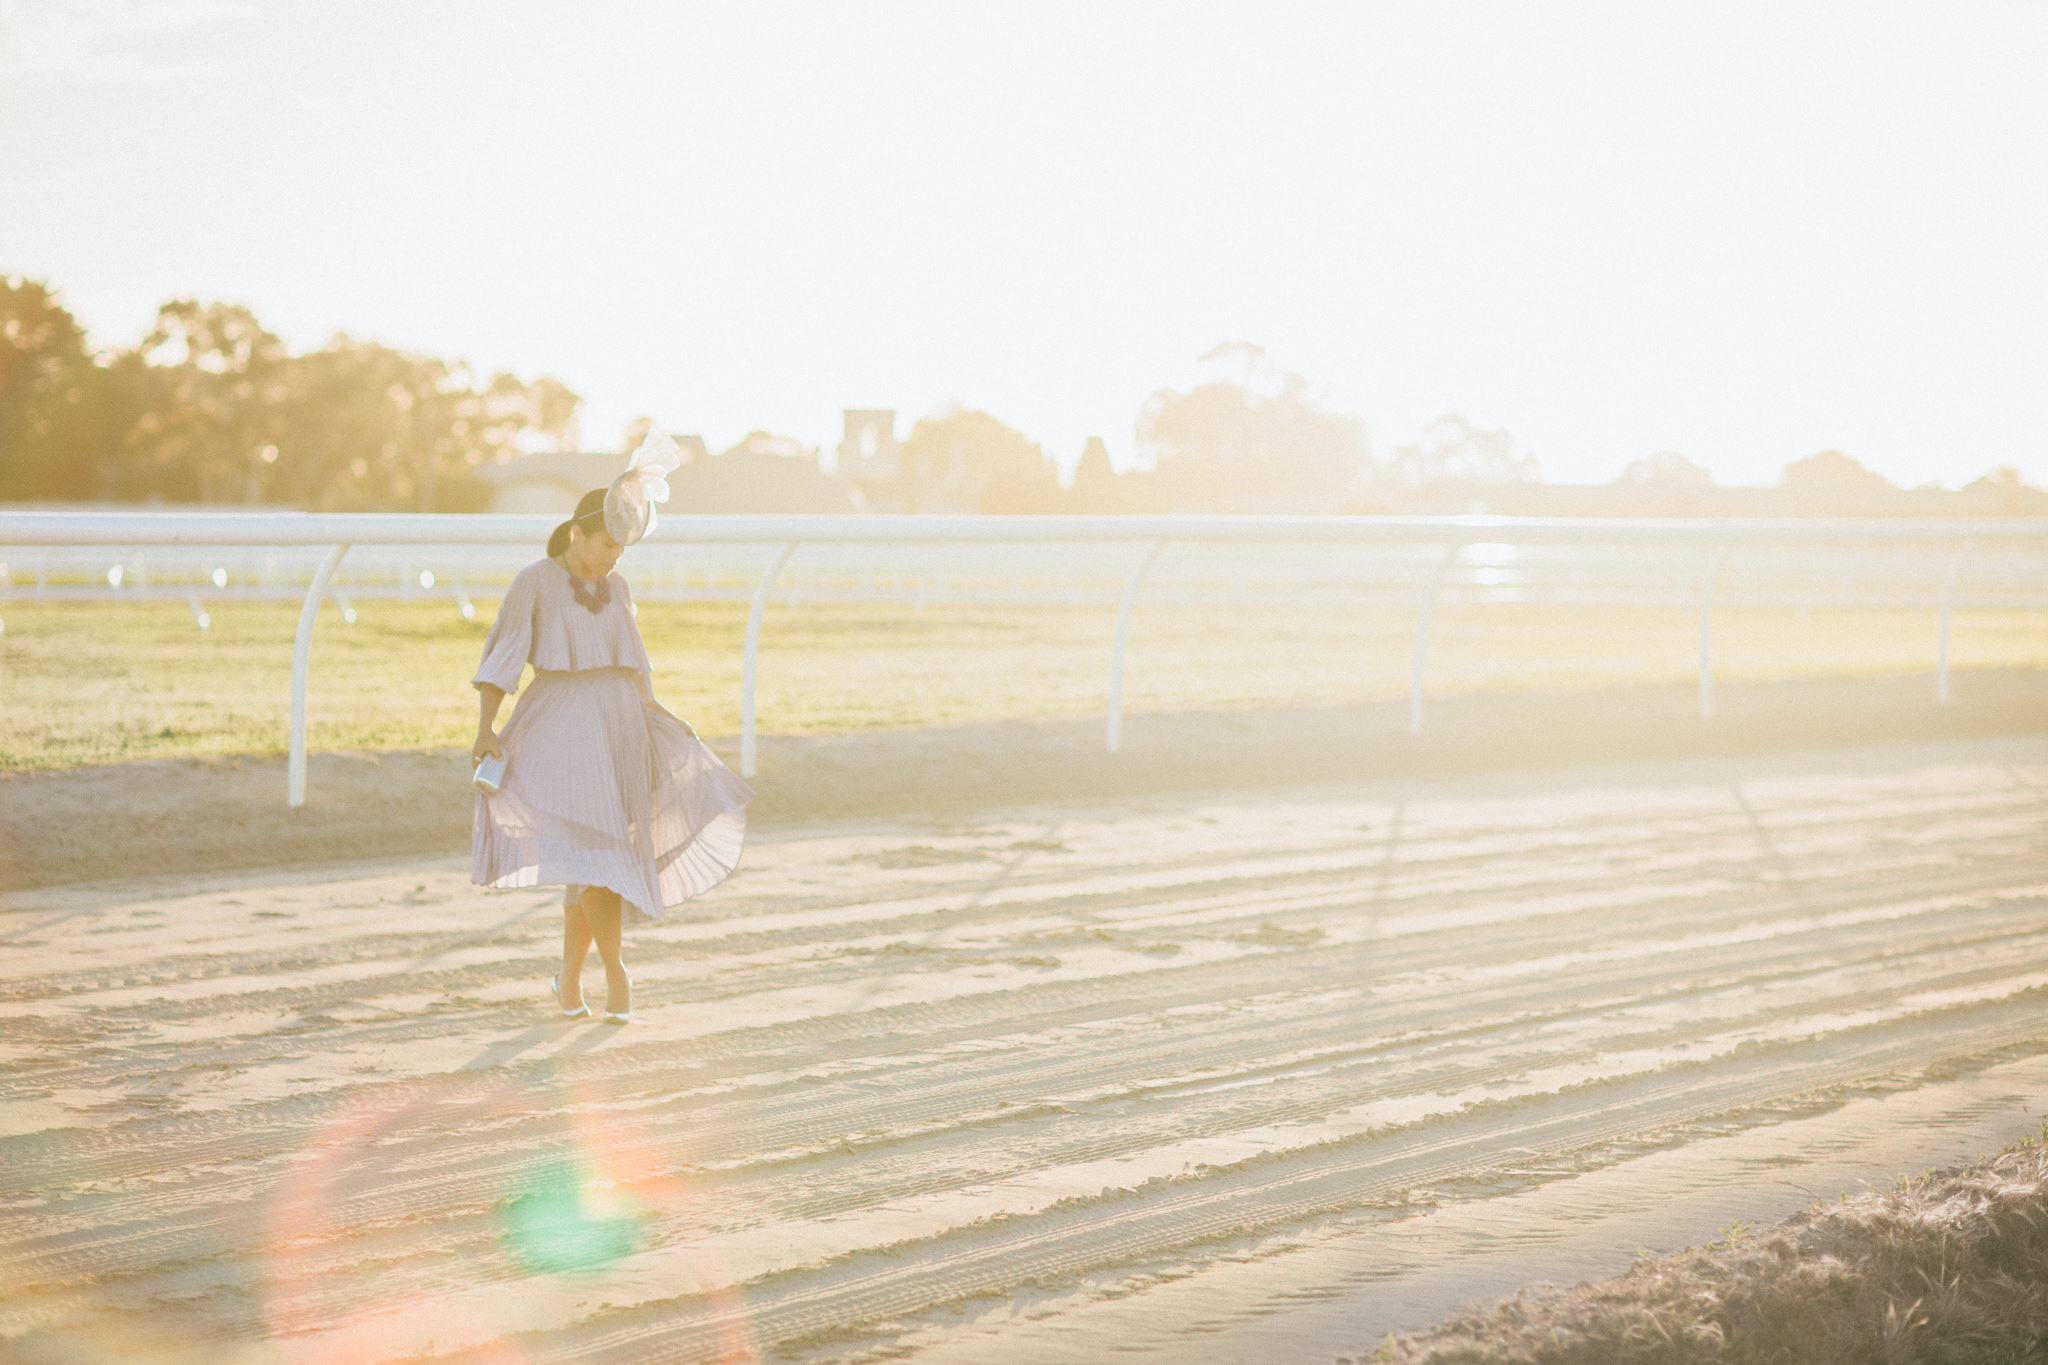 spring racing fashion - sunset shot on the racetrack